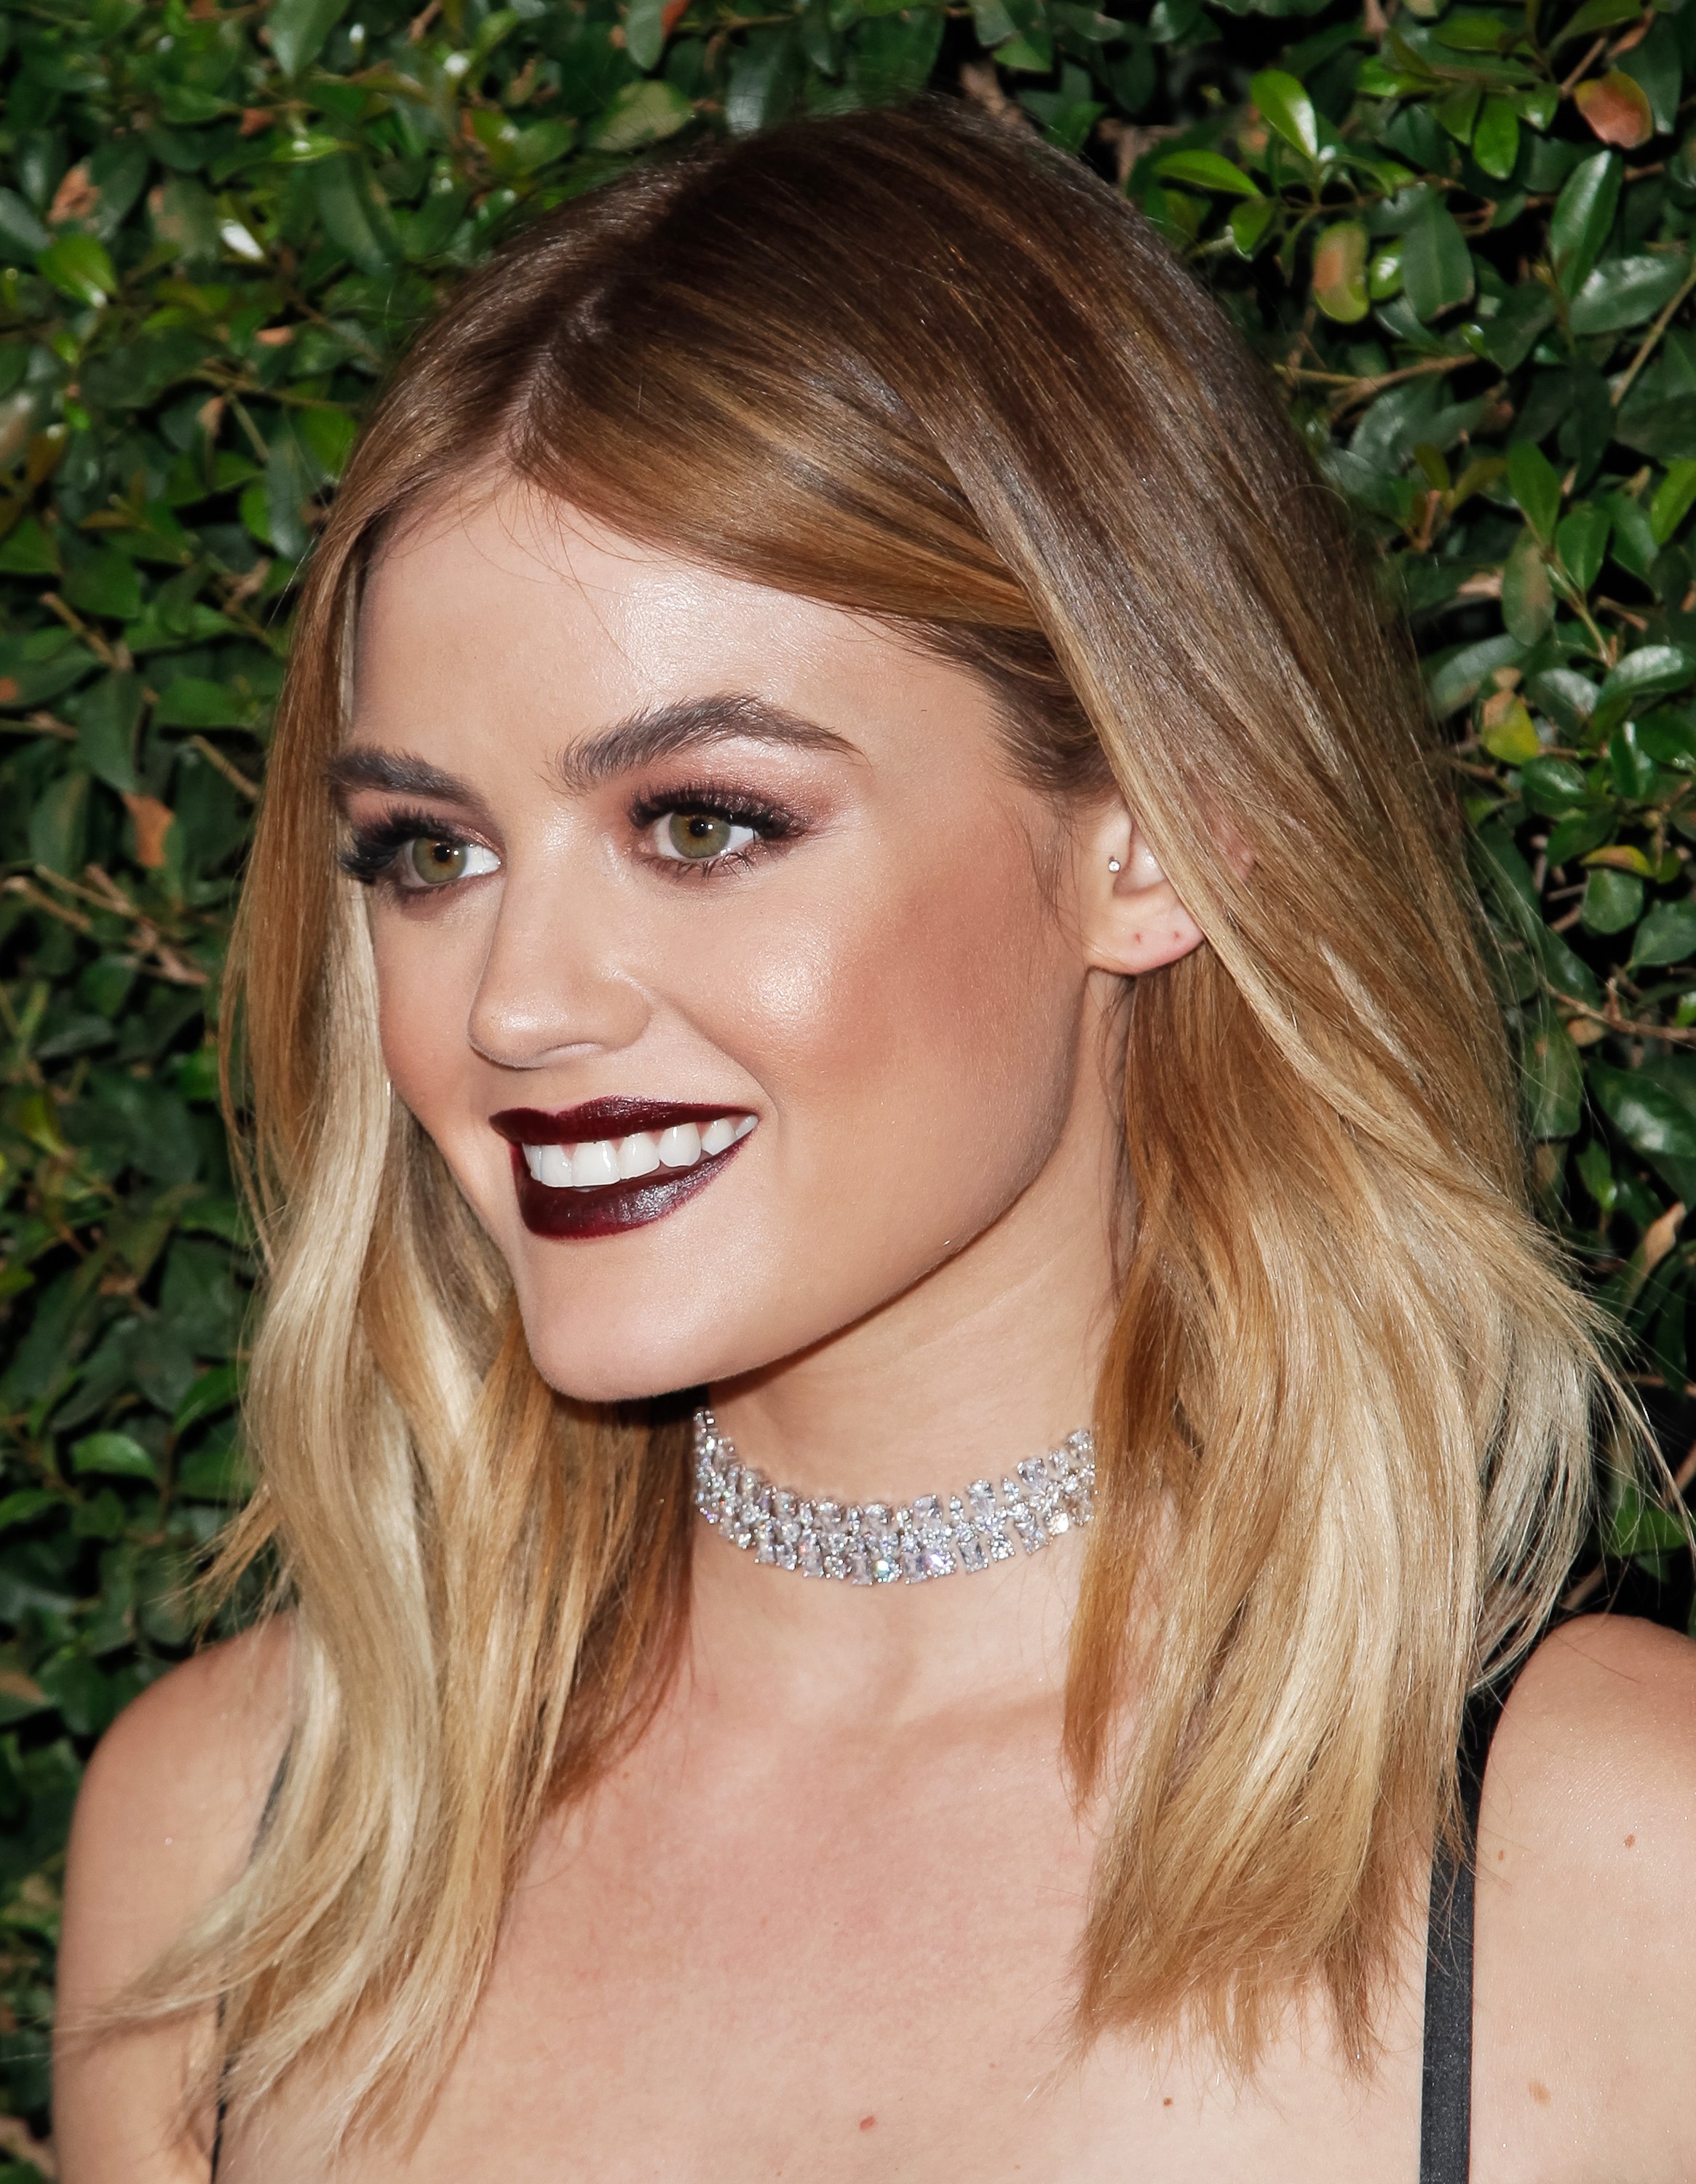 Lucy Hale's Blonde Hair: Her Colorist Tells the Real Story | Allure